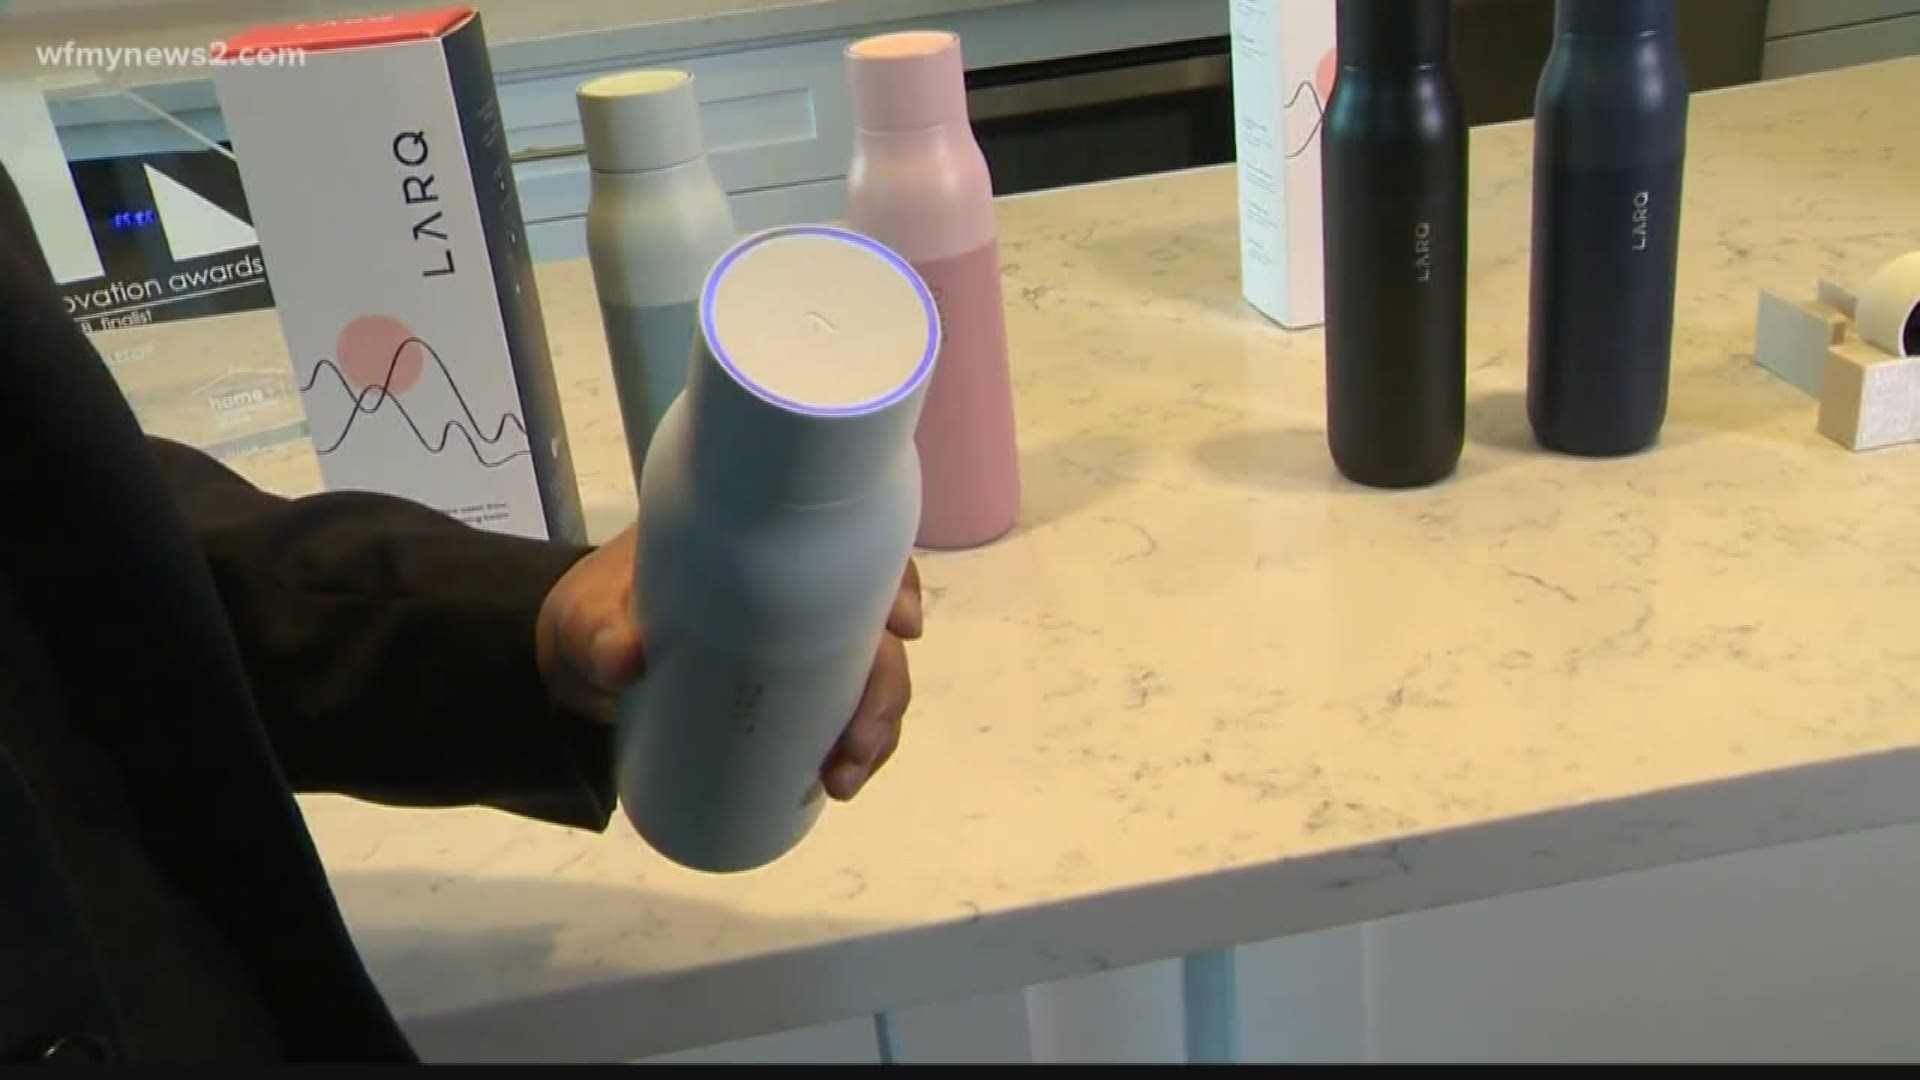 : Self-cleaning drinkware is no longer science fiction, it’s real.